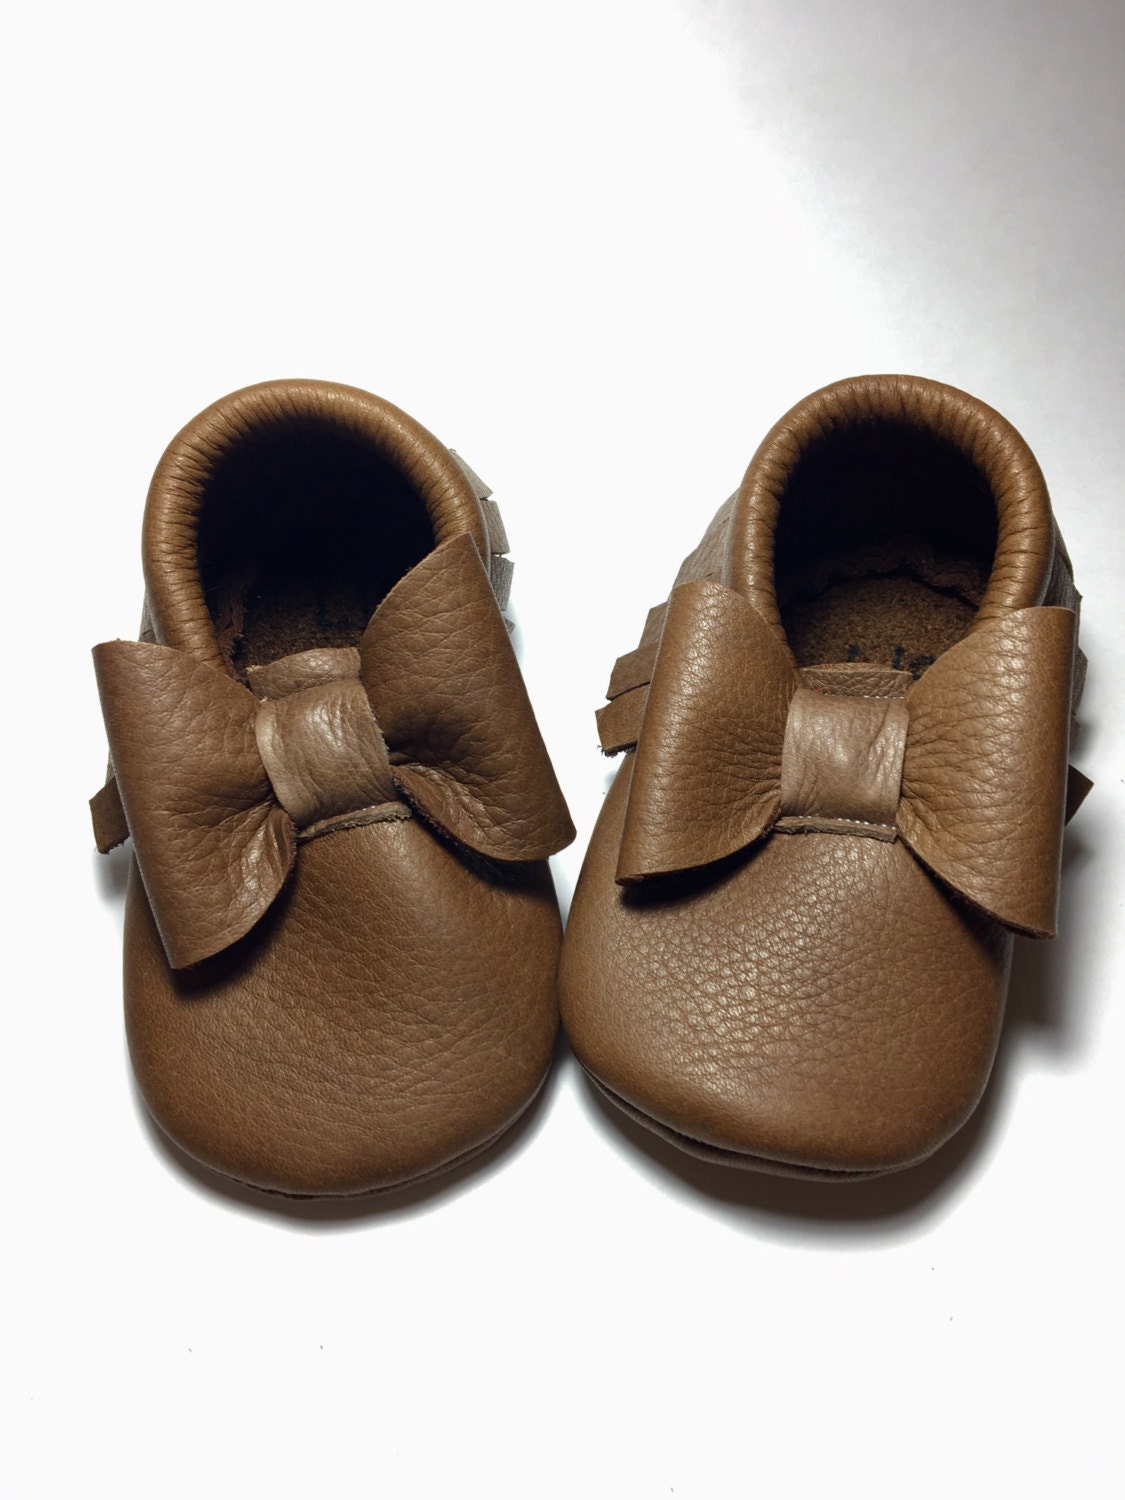 Brown Baby Moccasins/ Leather Moccasins/ Baby Shoes Girl/